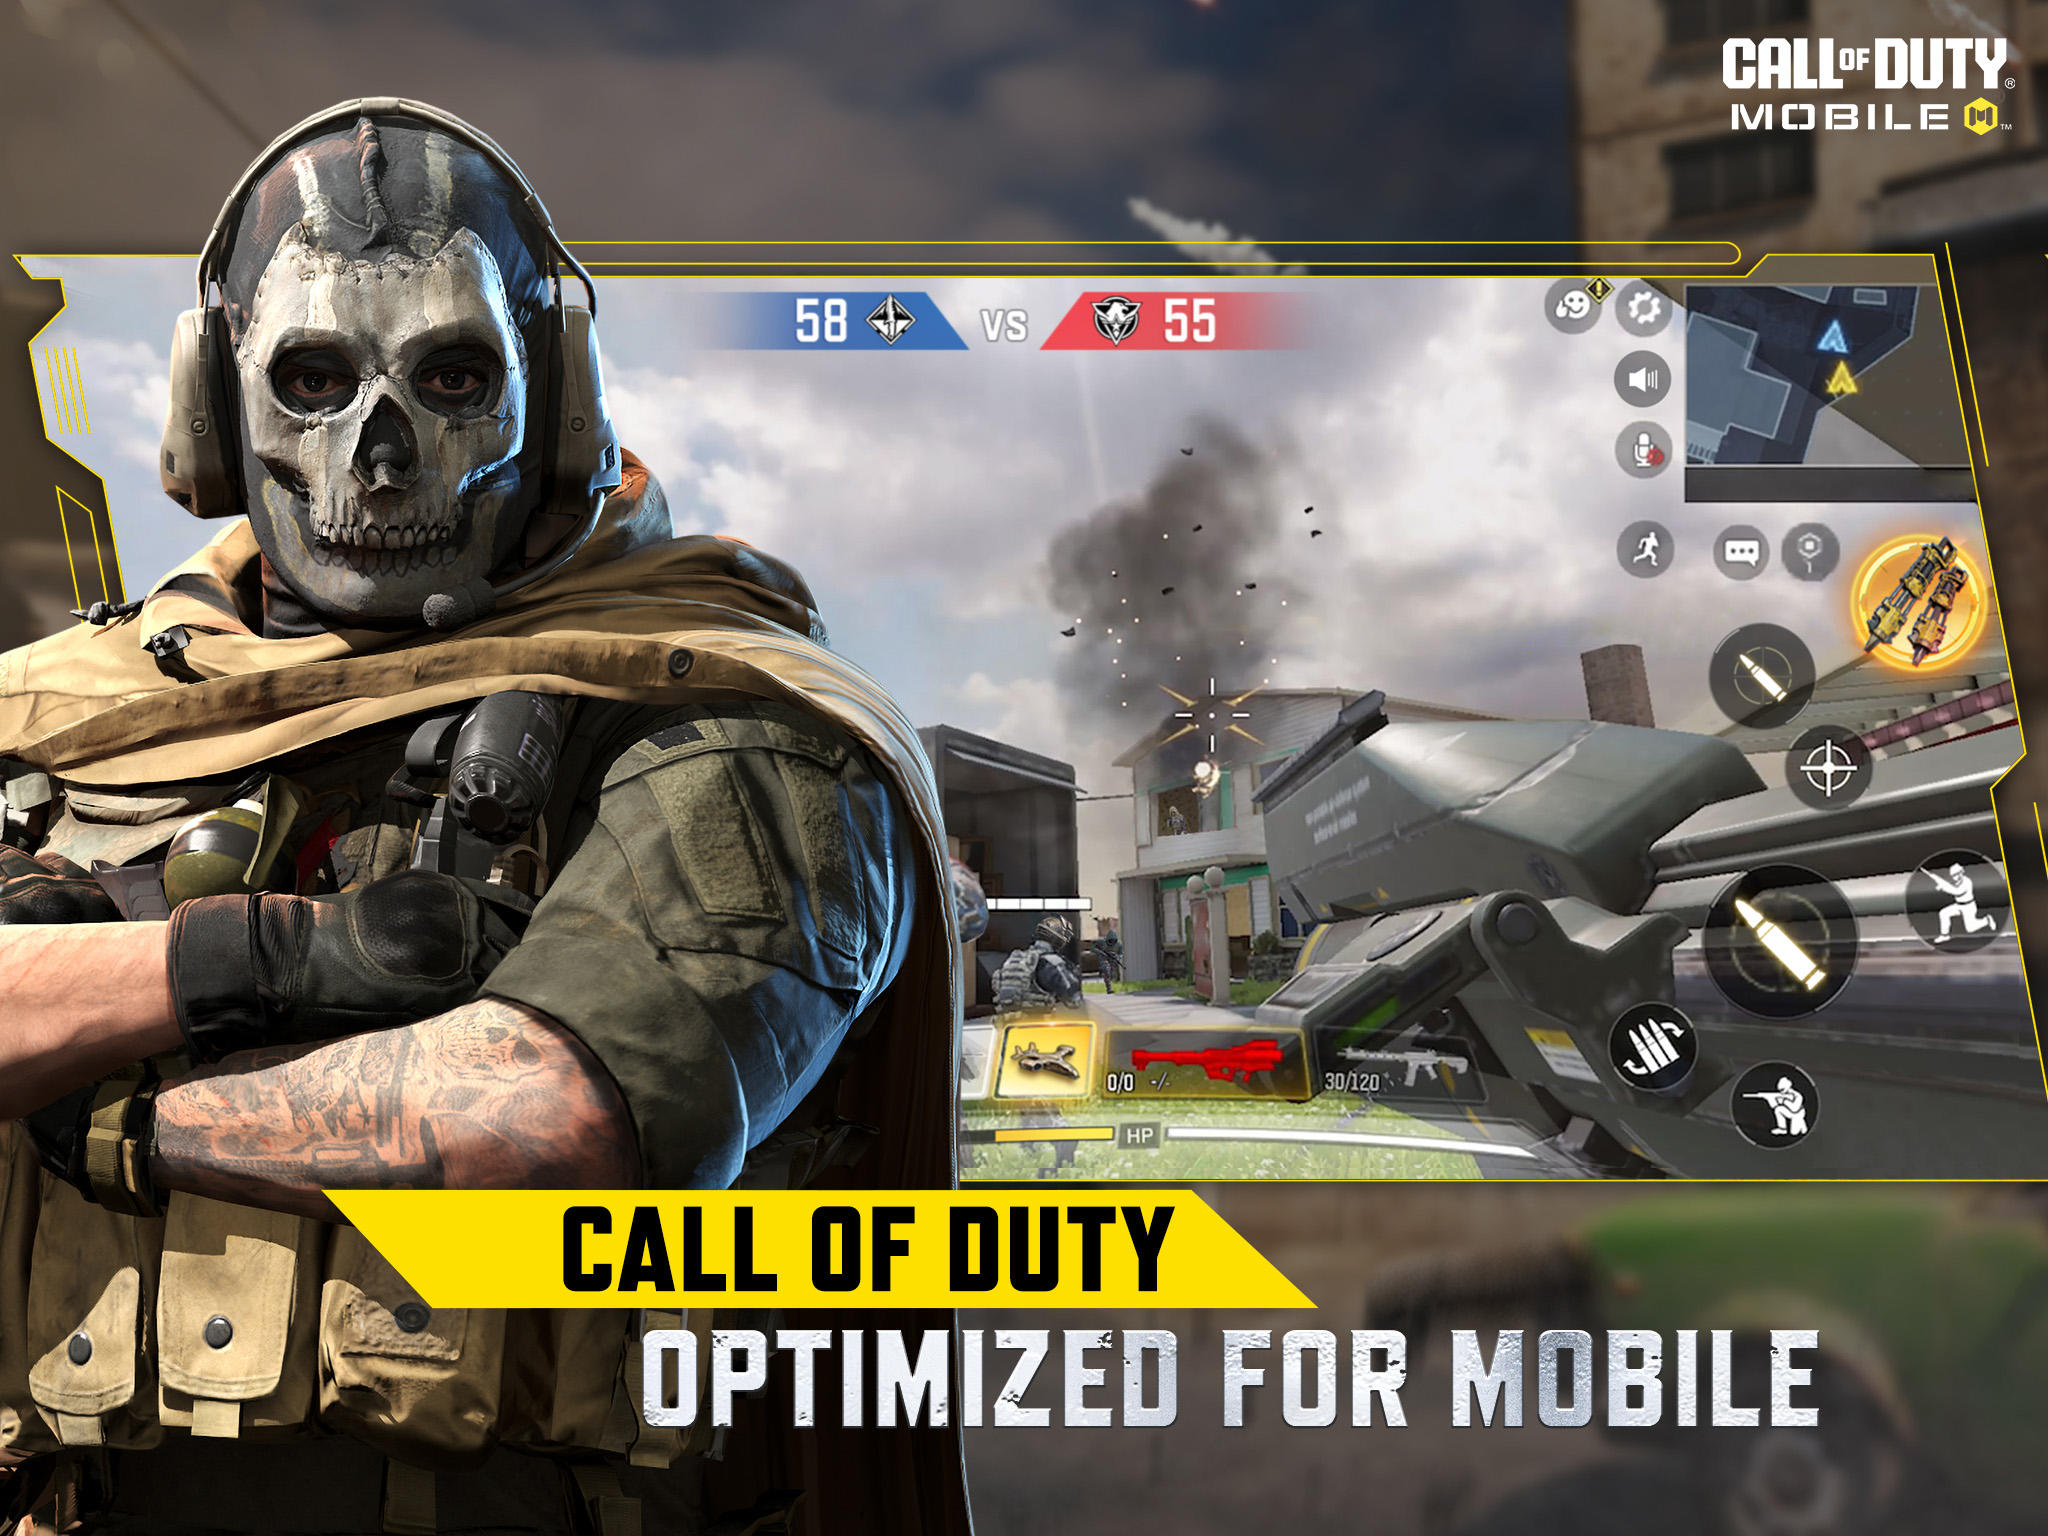 Call of Duty®: Mobile - Garena android iOS apk download for free